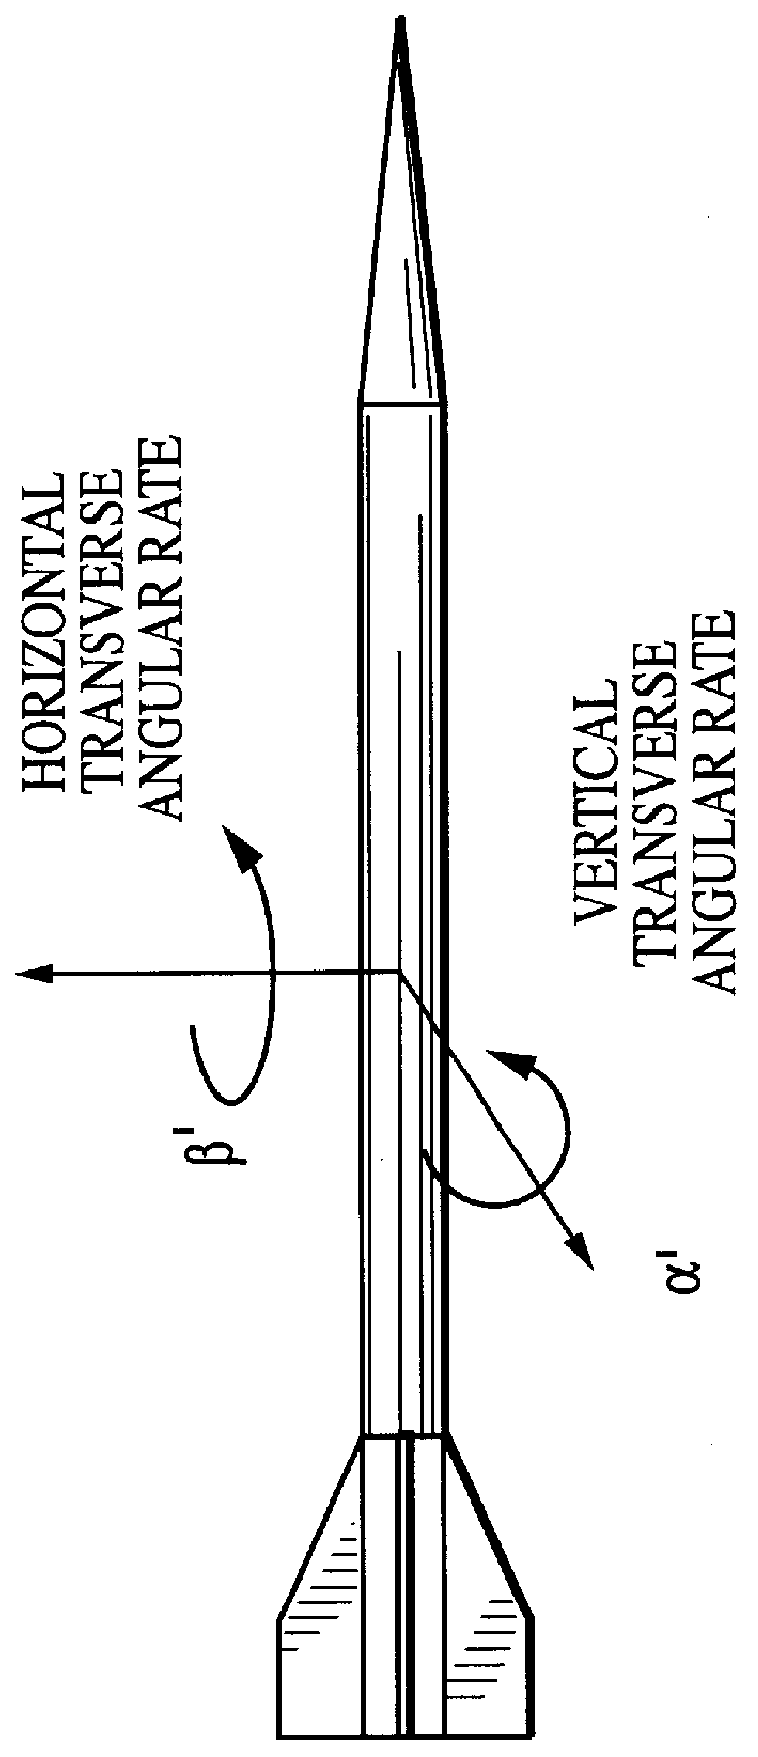 Tuning saboted projectile performance through bourrelet modification